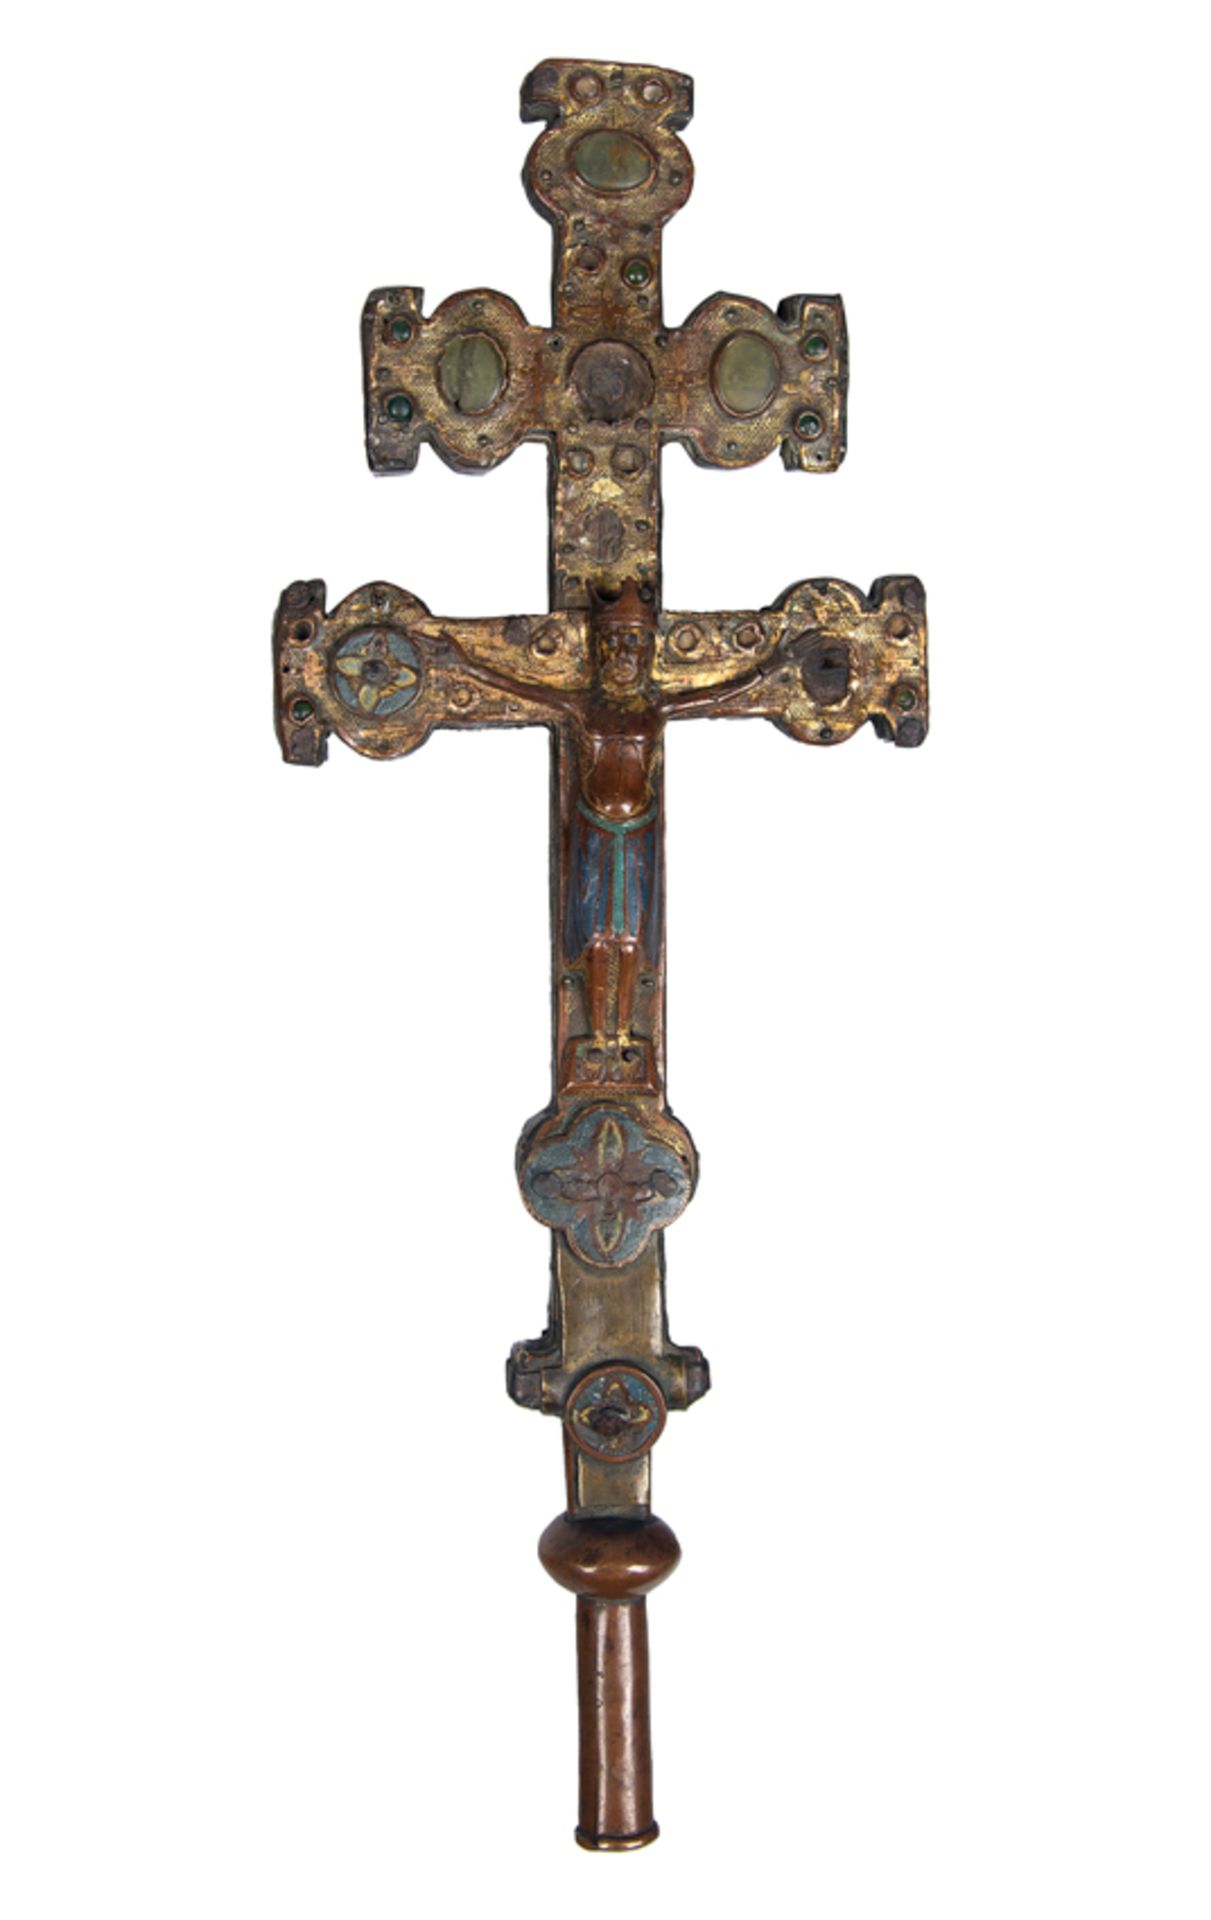 Processional or Altar Cross. Limoges, France. Romanesque. Second quarter of the 13th century.